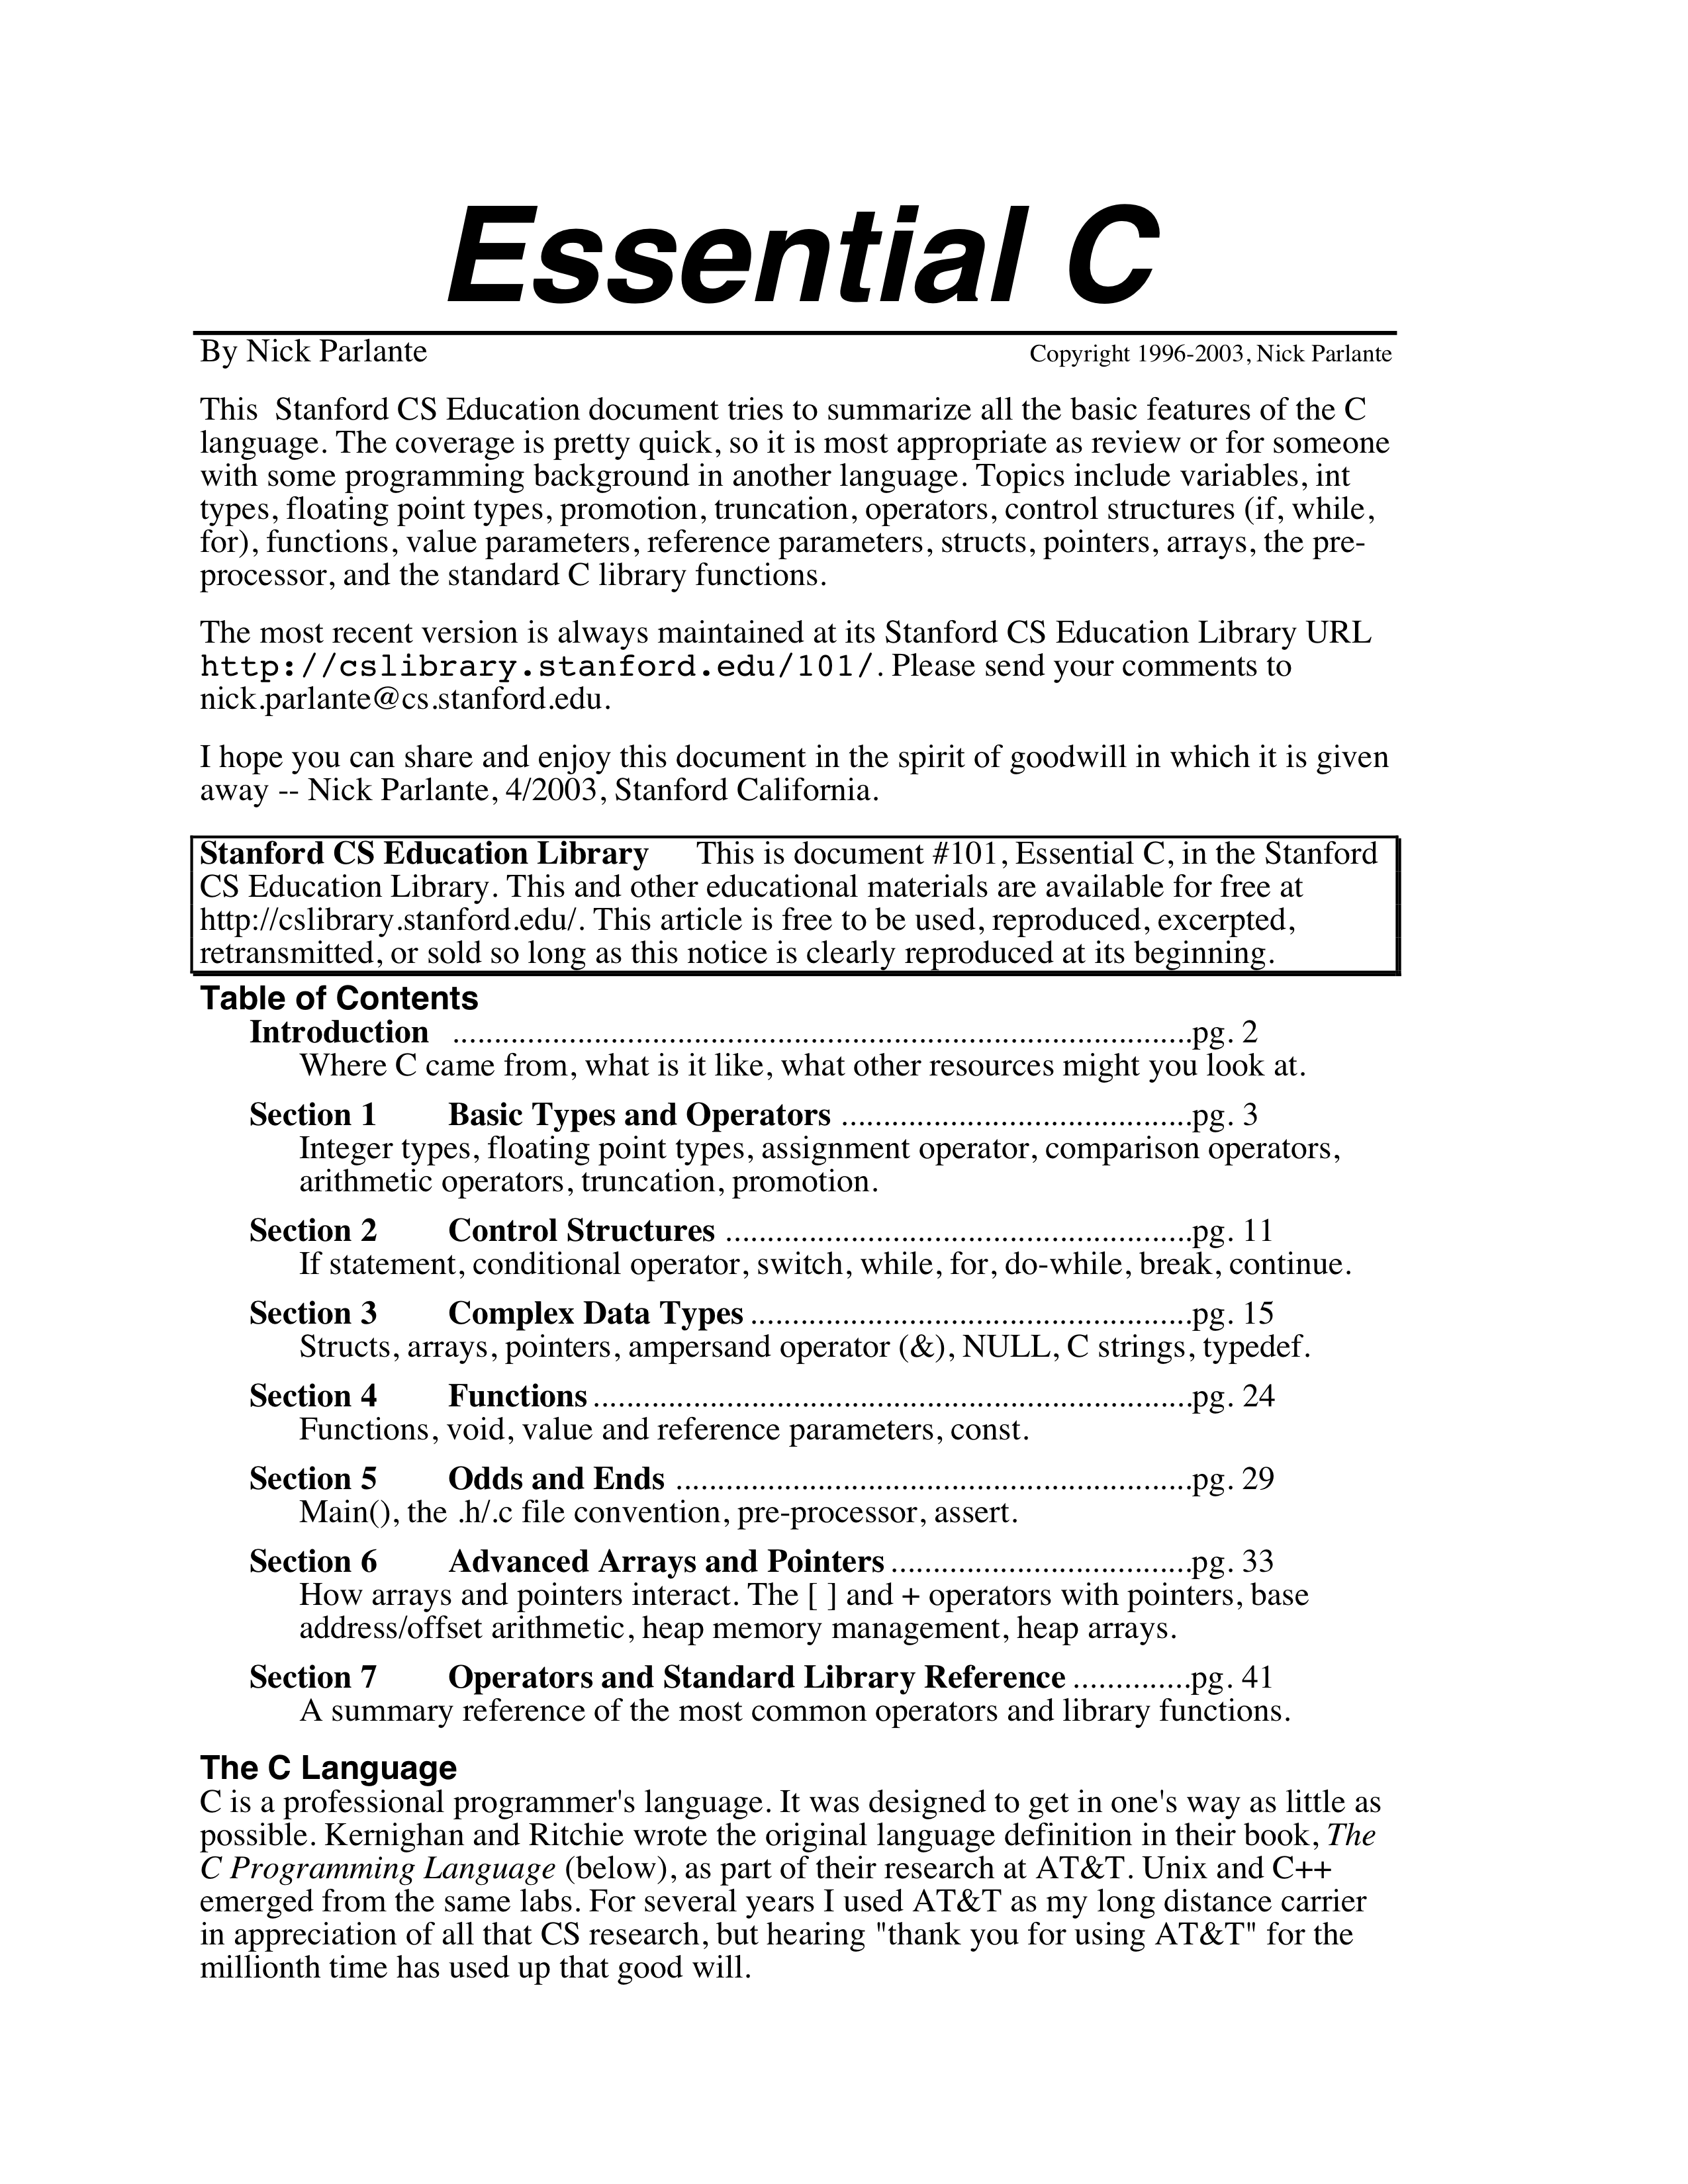 First page of Essential C